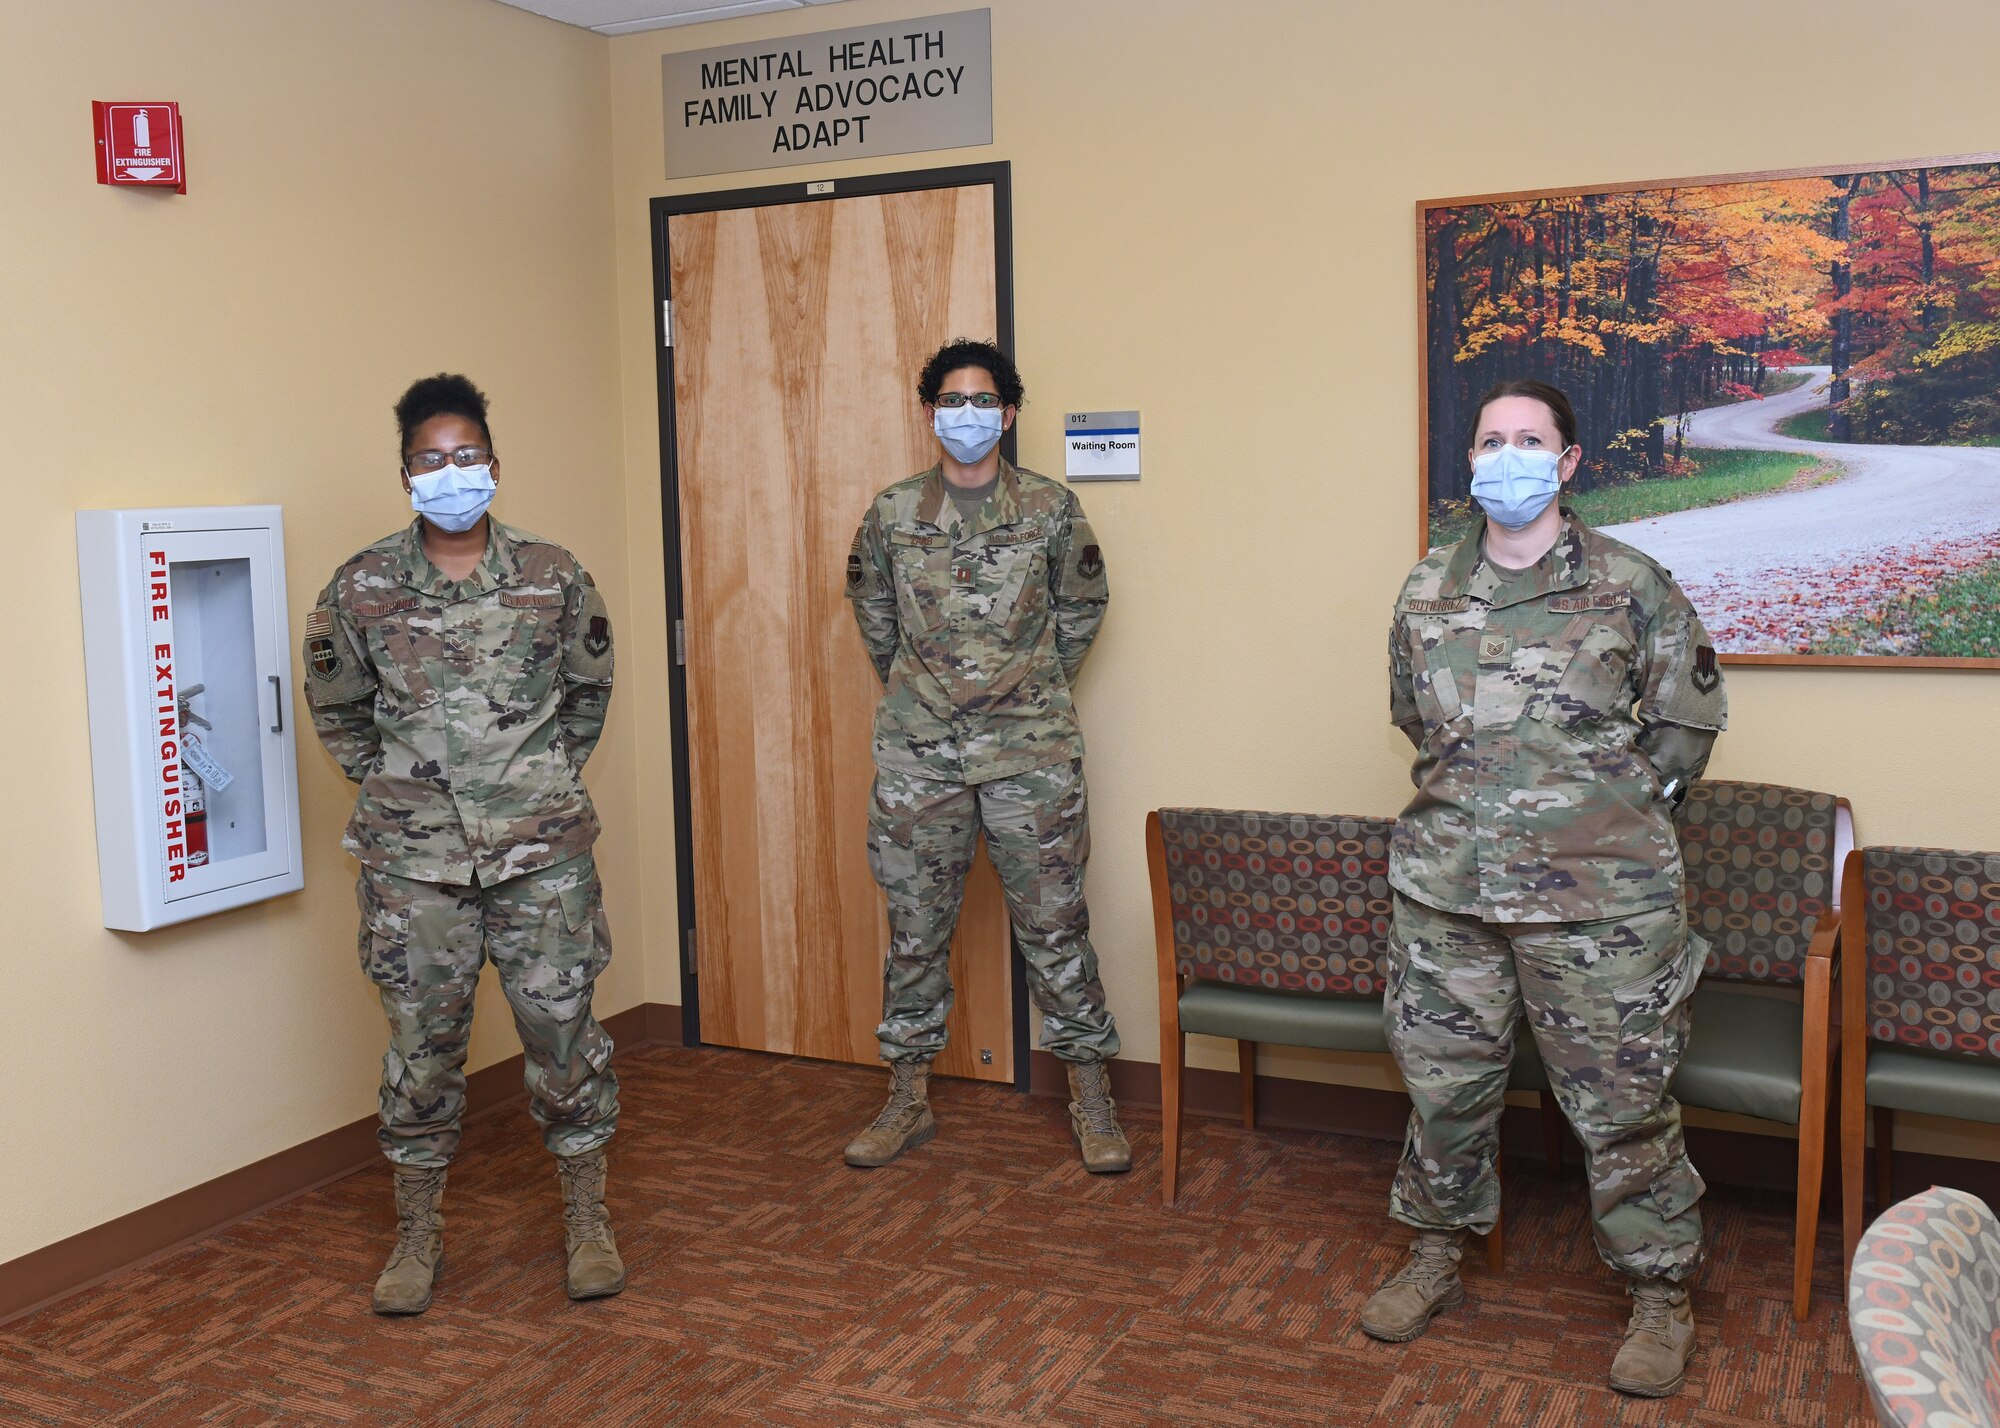 Airmen from the 9th Medical Operations Squadron Mental Health Clinic pose for a picture, April 15, 2020, at Beale Air Force Base California. These Airmen provide mental healthcare to patients, making sure they are mentally fit and mission ready. (U.S. Air Force photo by Airman 1st Class Luis A. Ruiz-Vazquez)